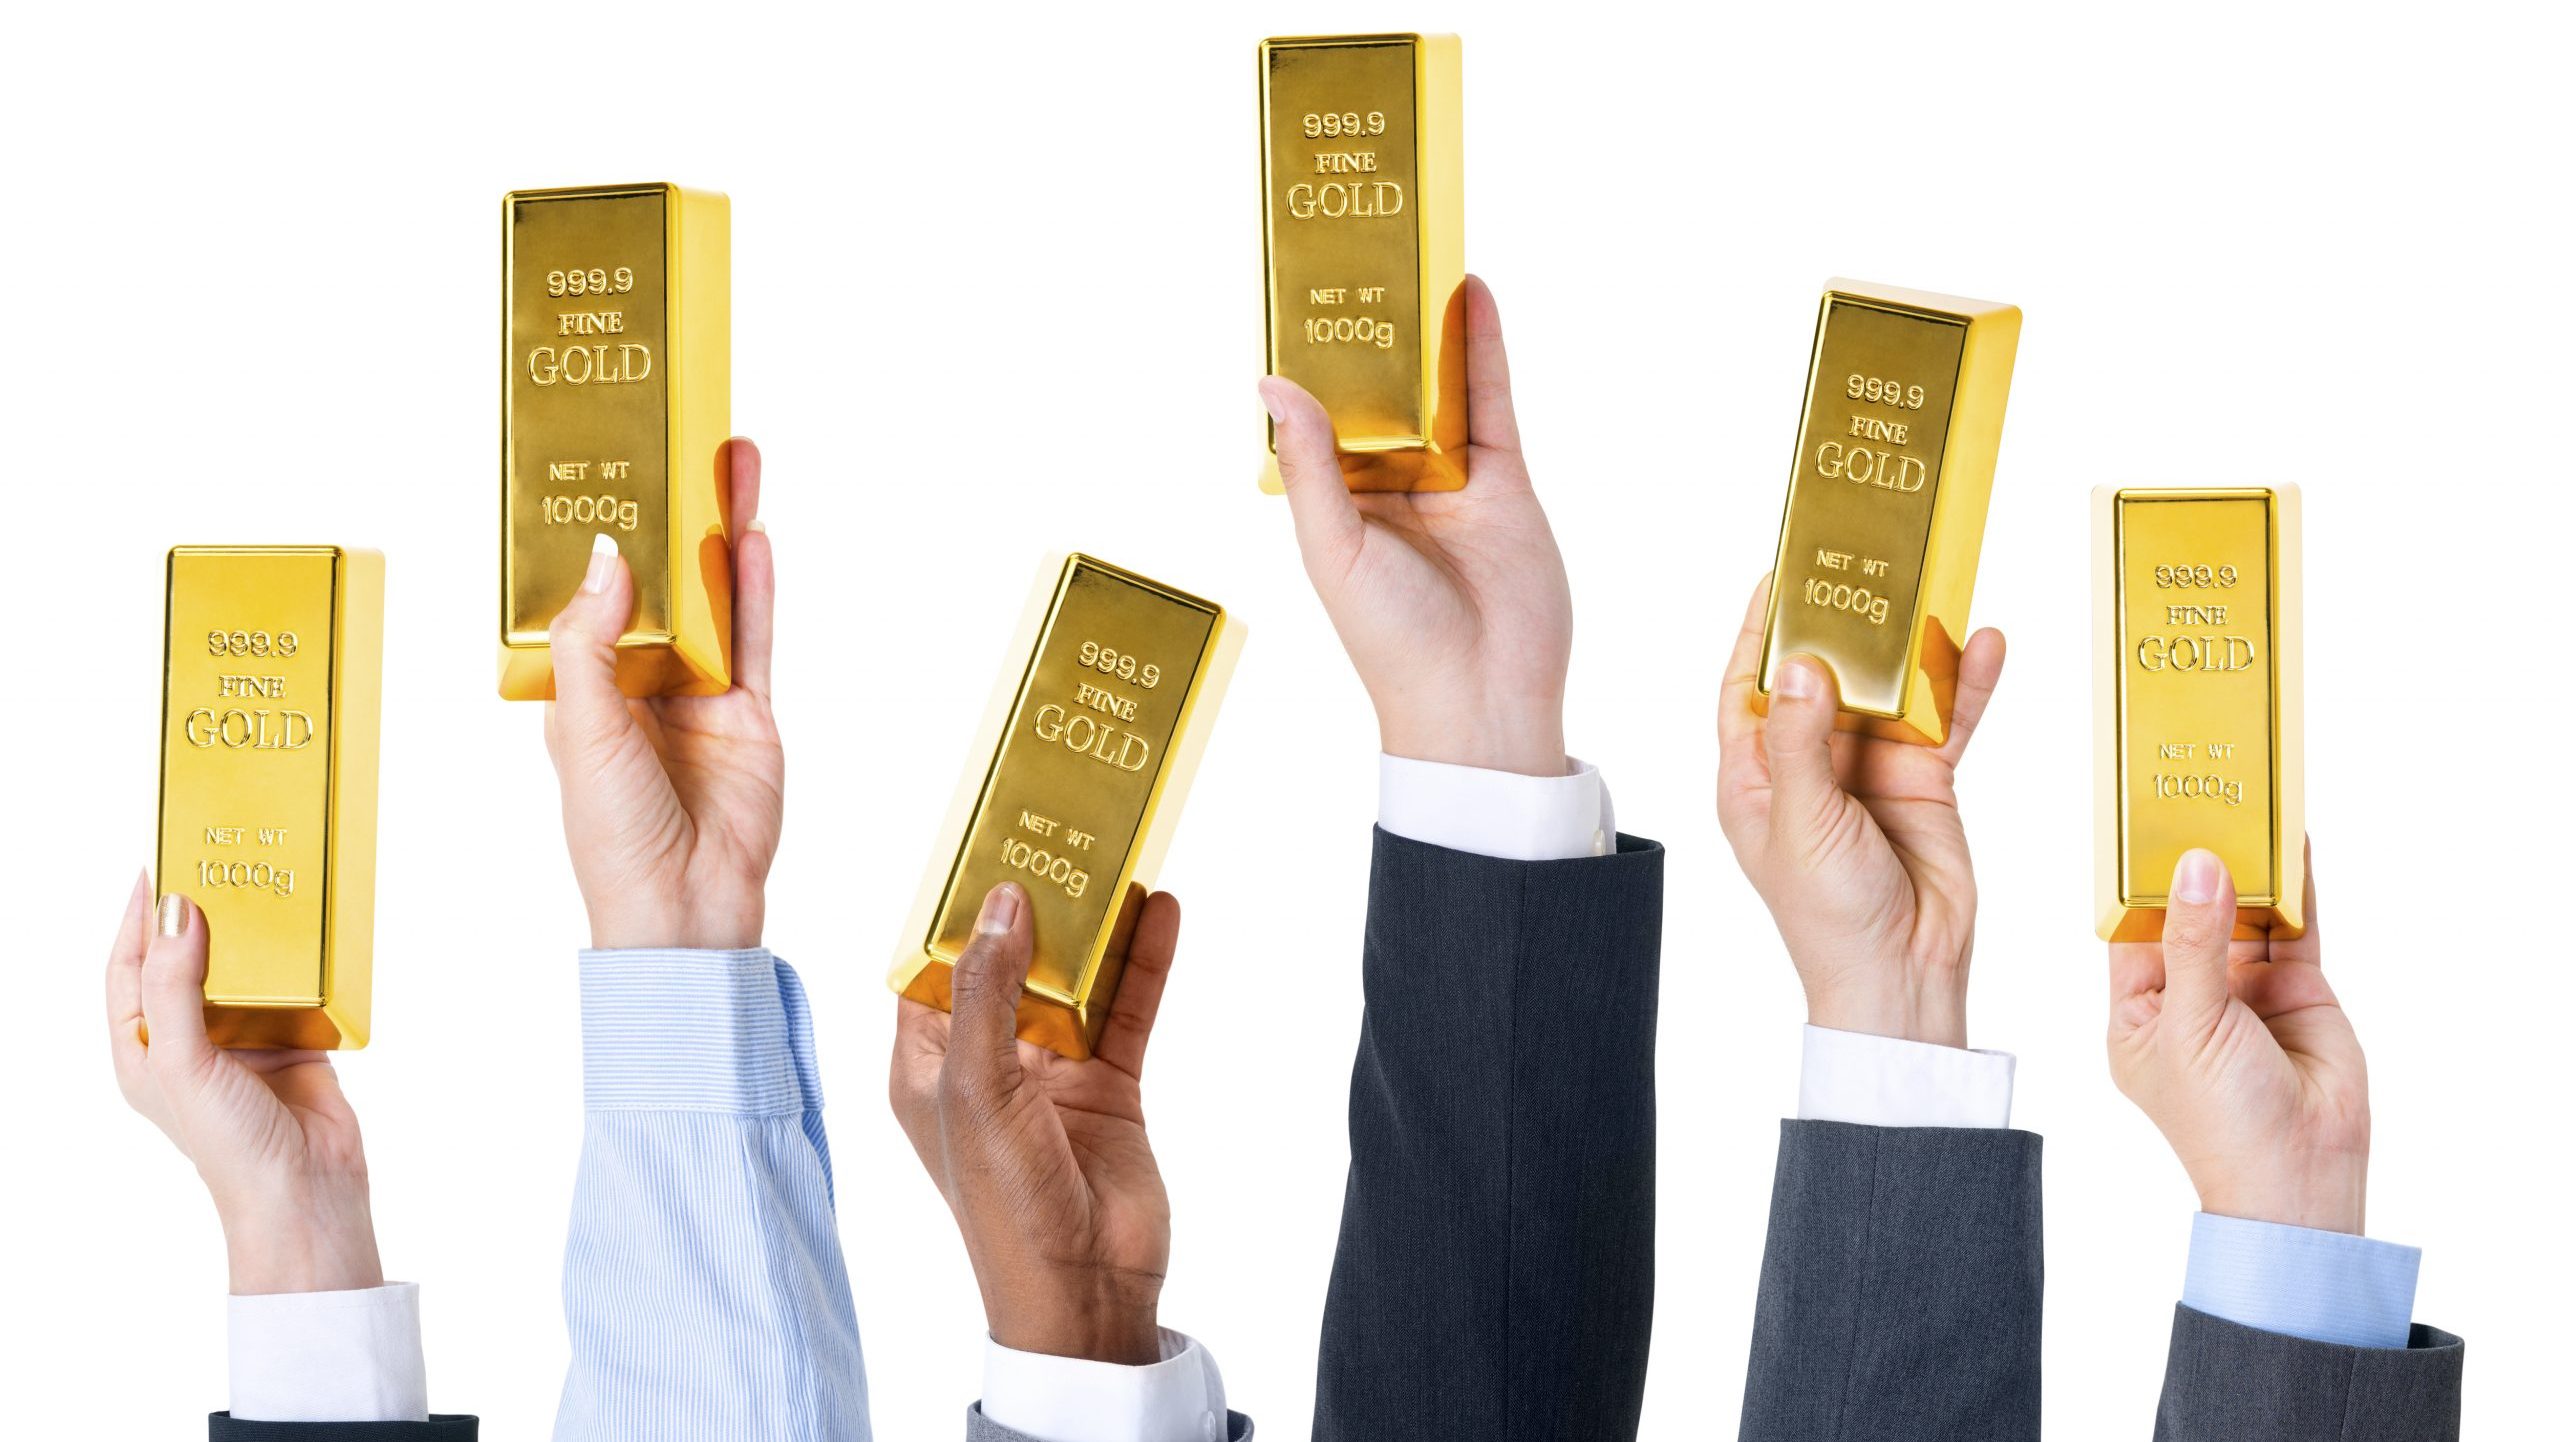 Hands holding gold bars.